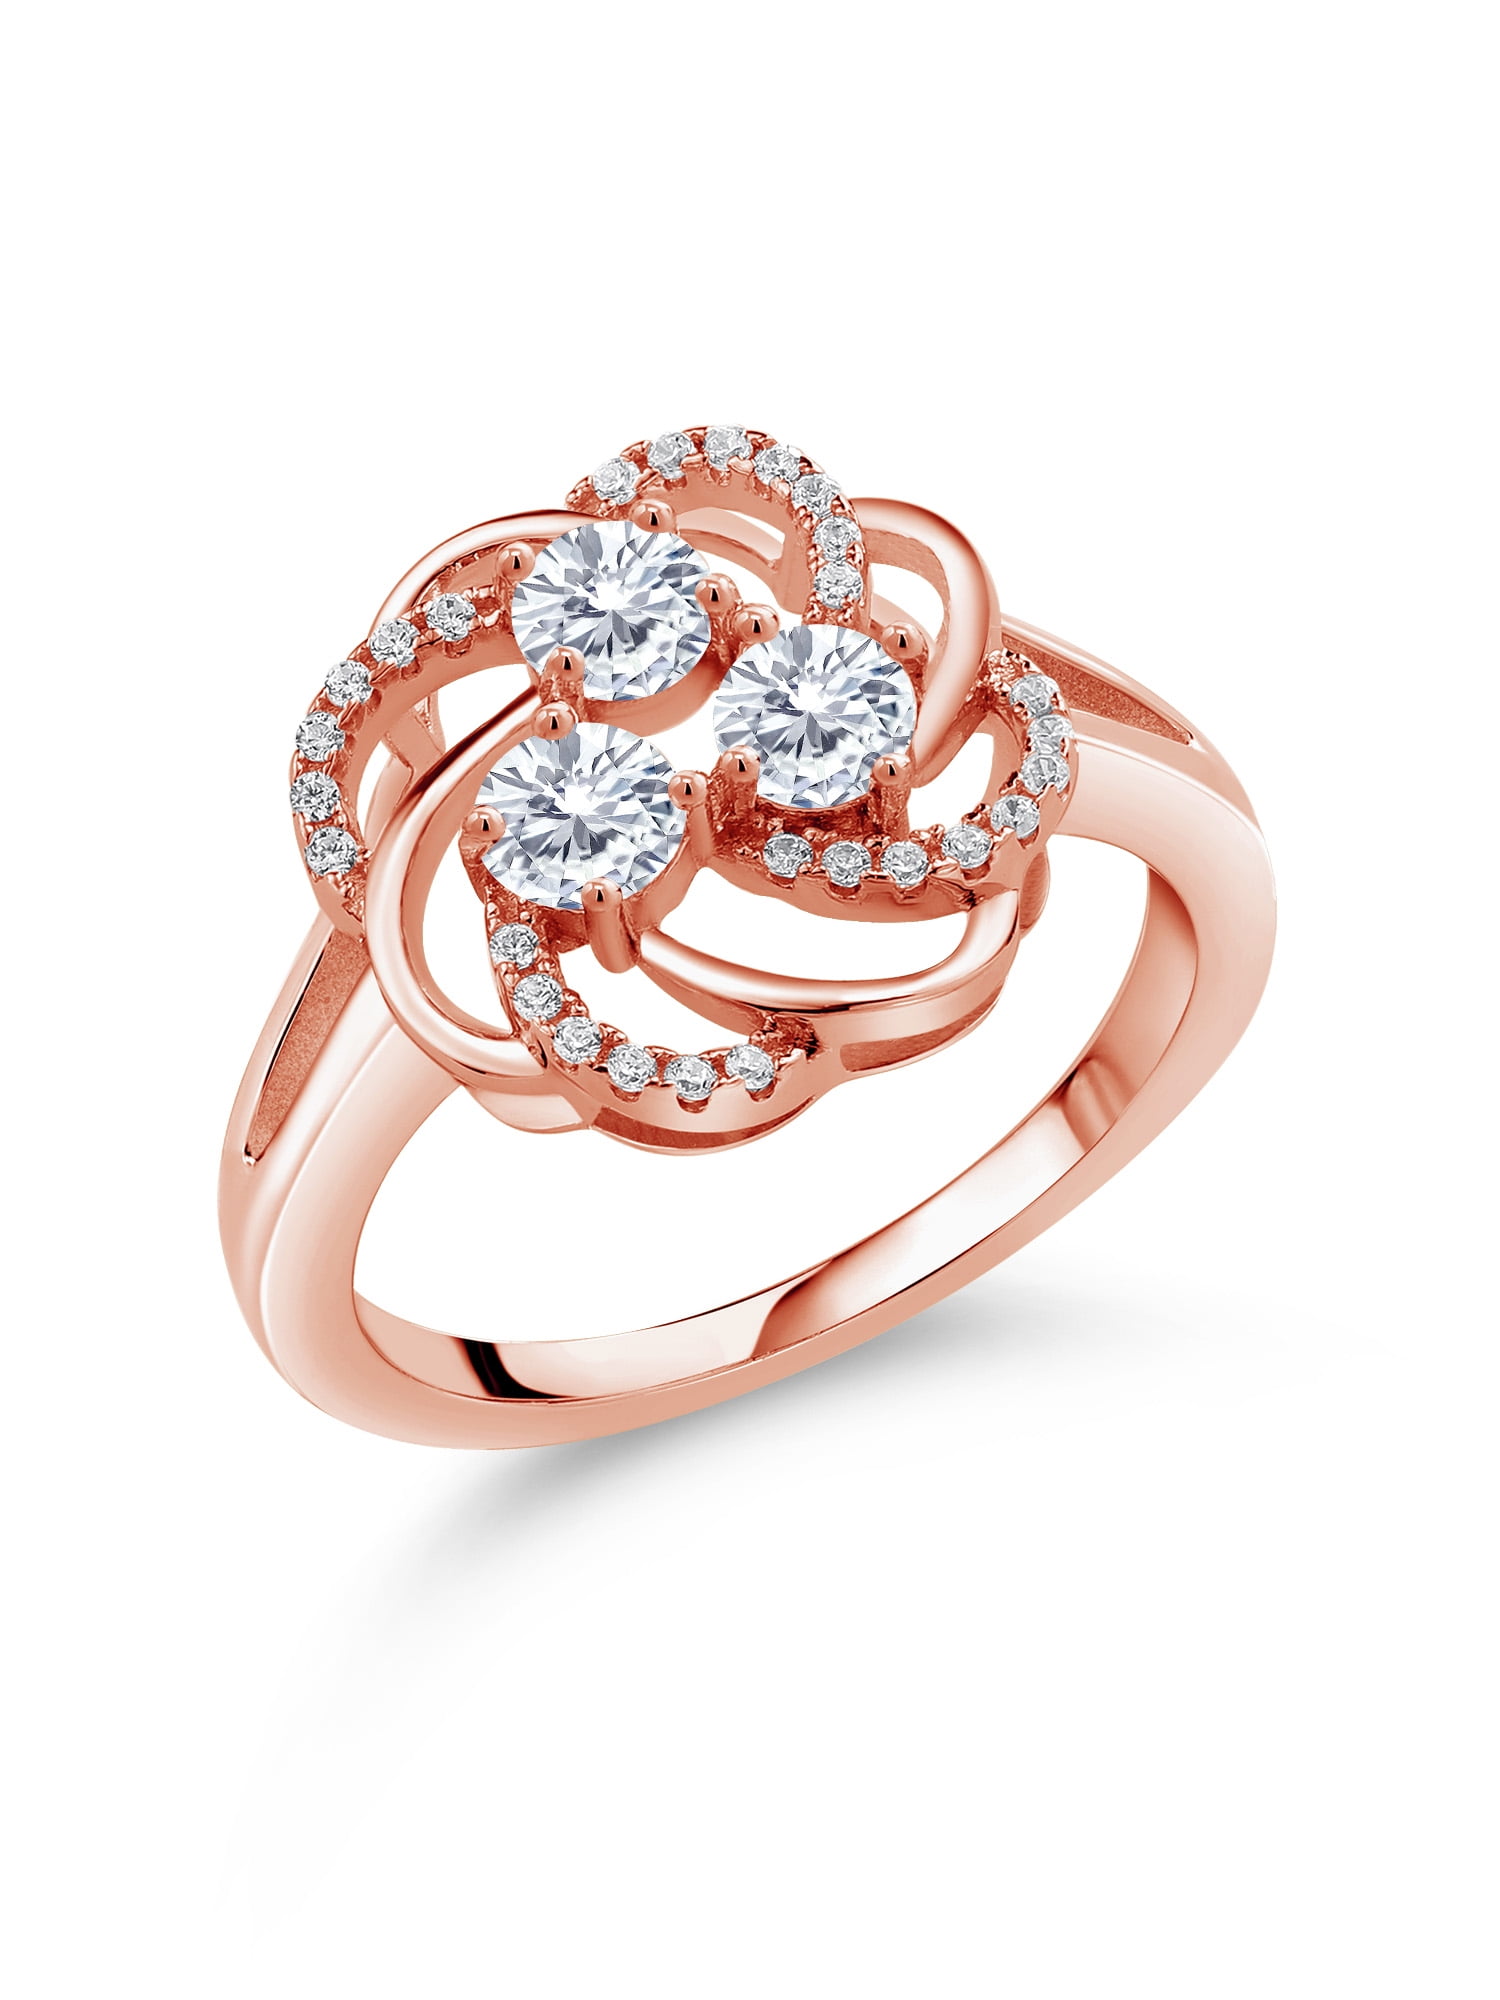 Gem Stone King 18K Rose Gold Plated Silver 3-Stone 3-Stone Flower Ring Set  with Forever Classic Very Light IJK Moissanite from Charles & Colvard (0.91  Cttw) 